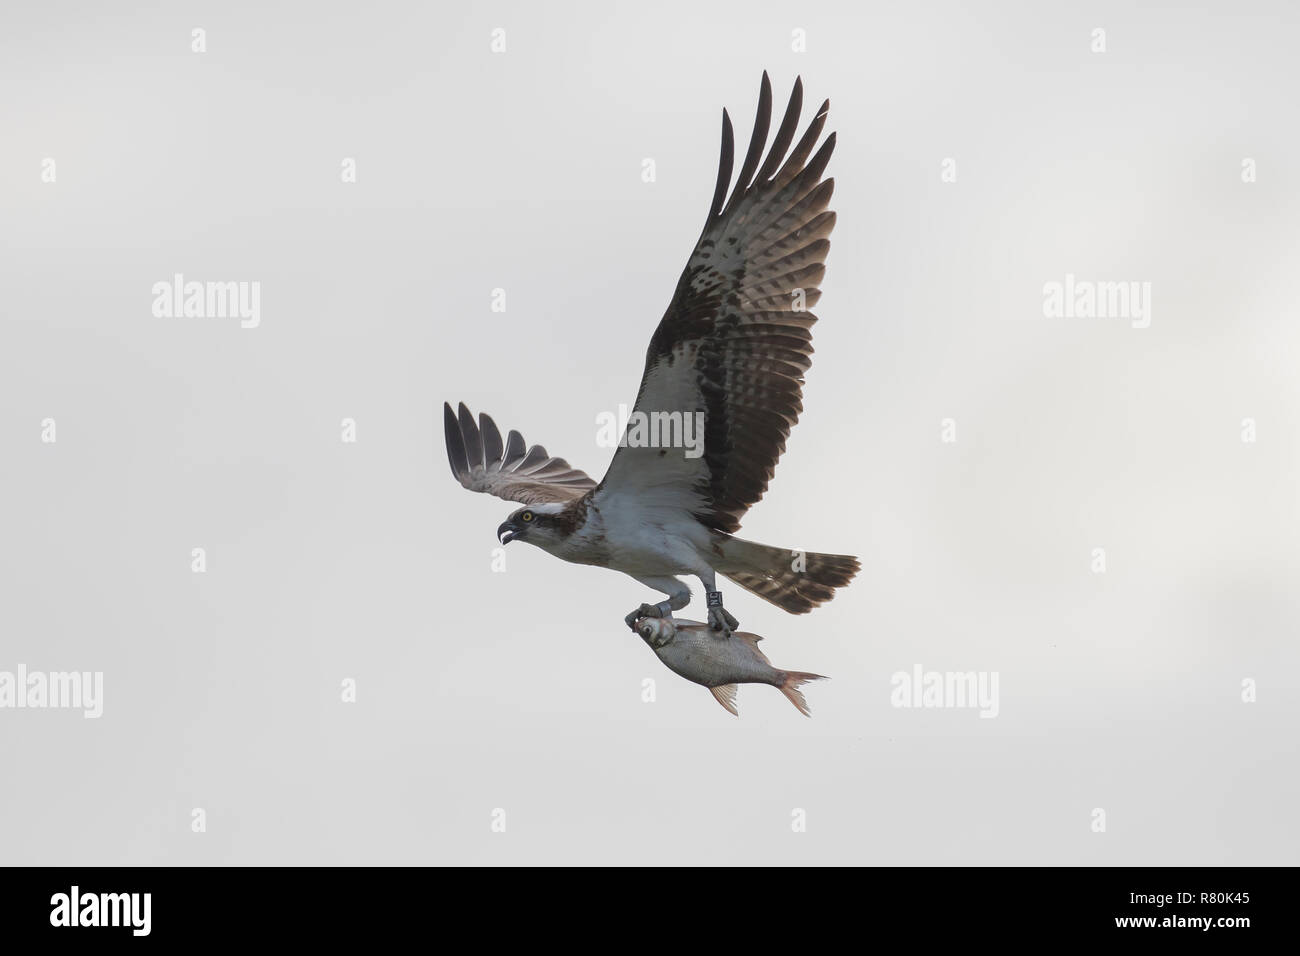 Osprey (Pandion haliaetus) in flight, with fish prey in its talons. Germany Stock Photo